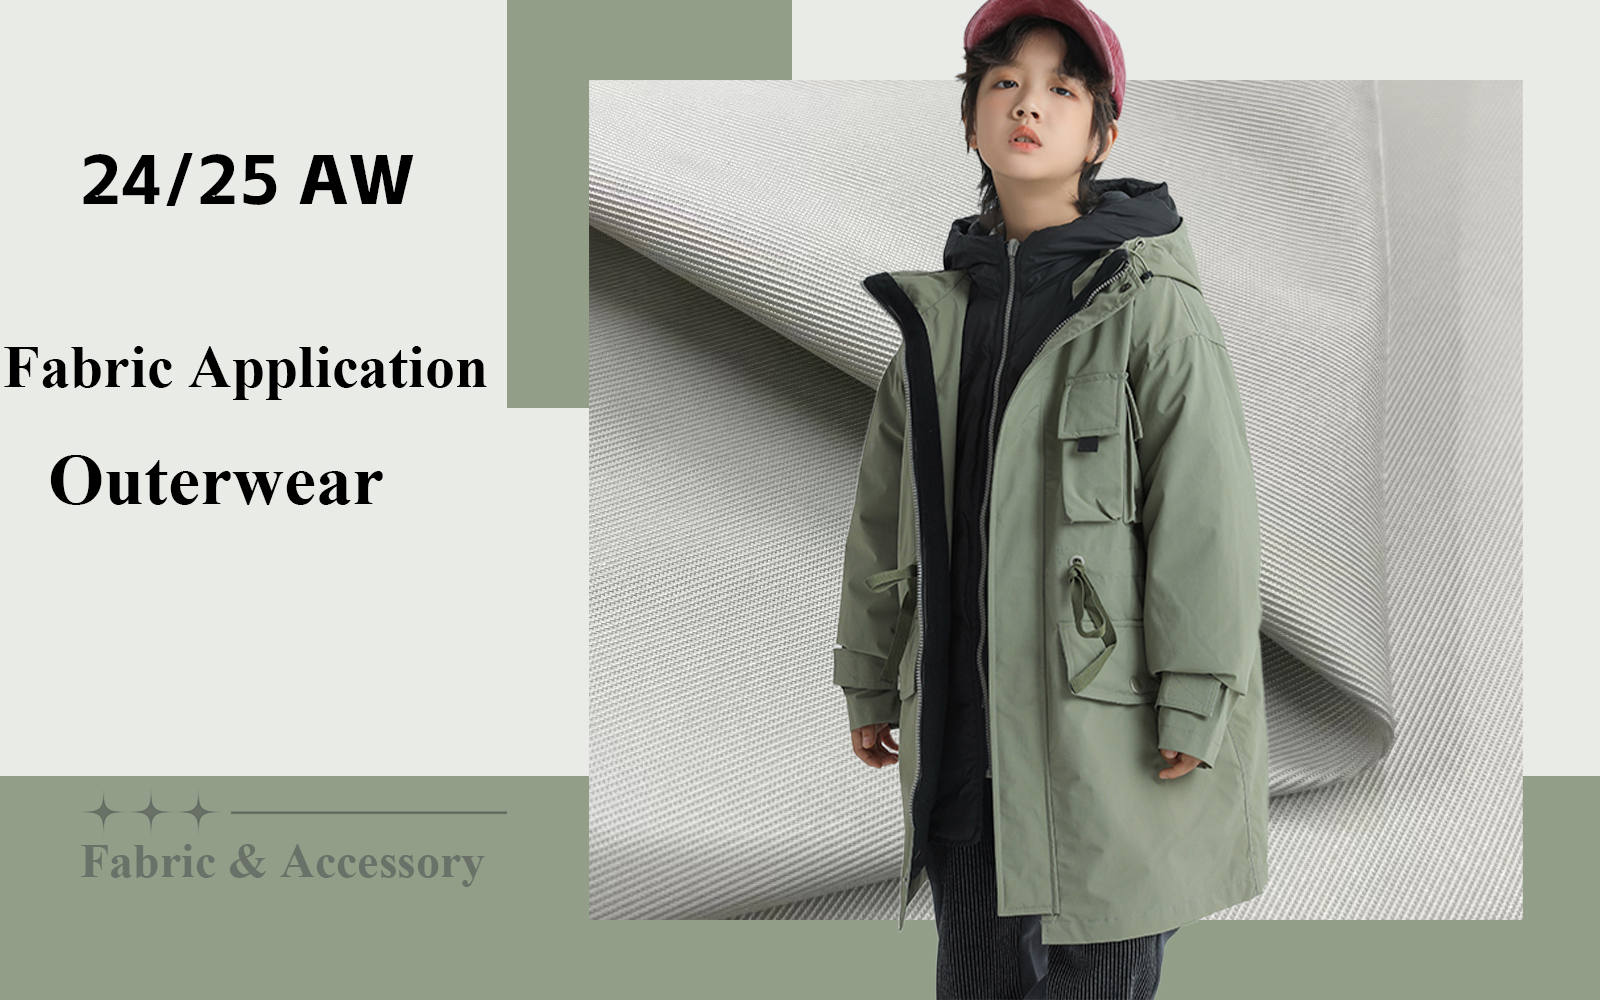 The Fabric Trend for Boys' Outerwear